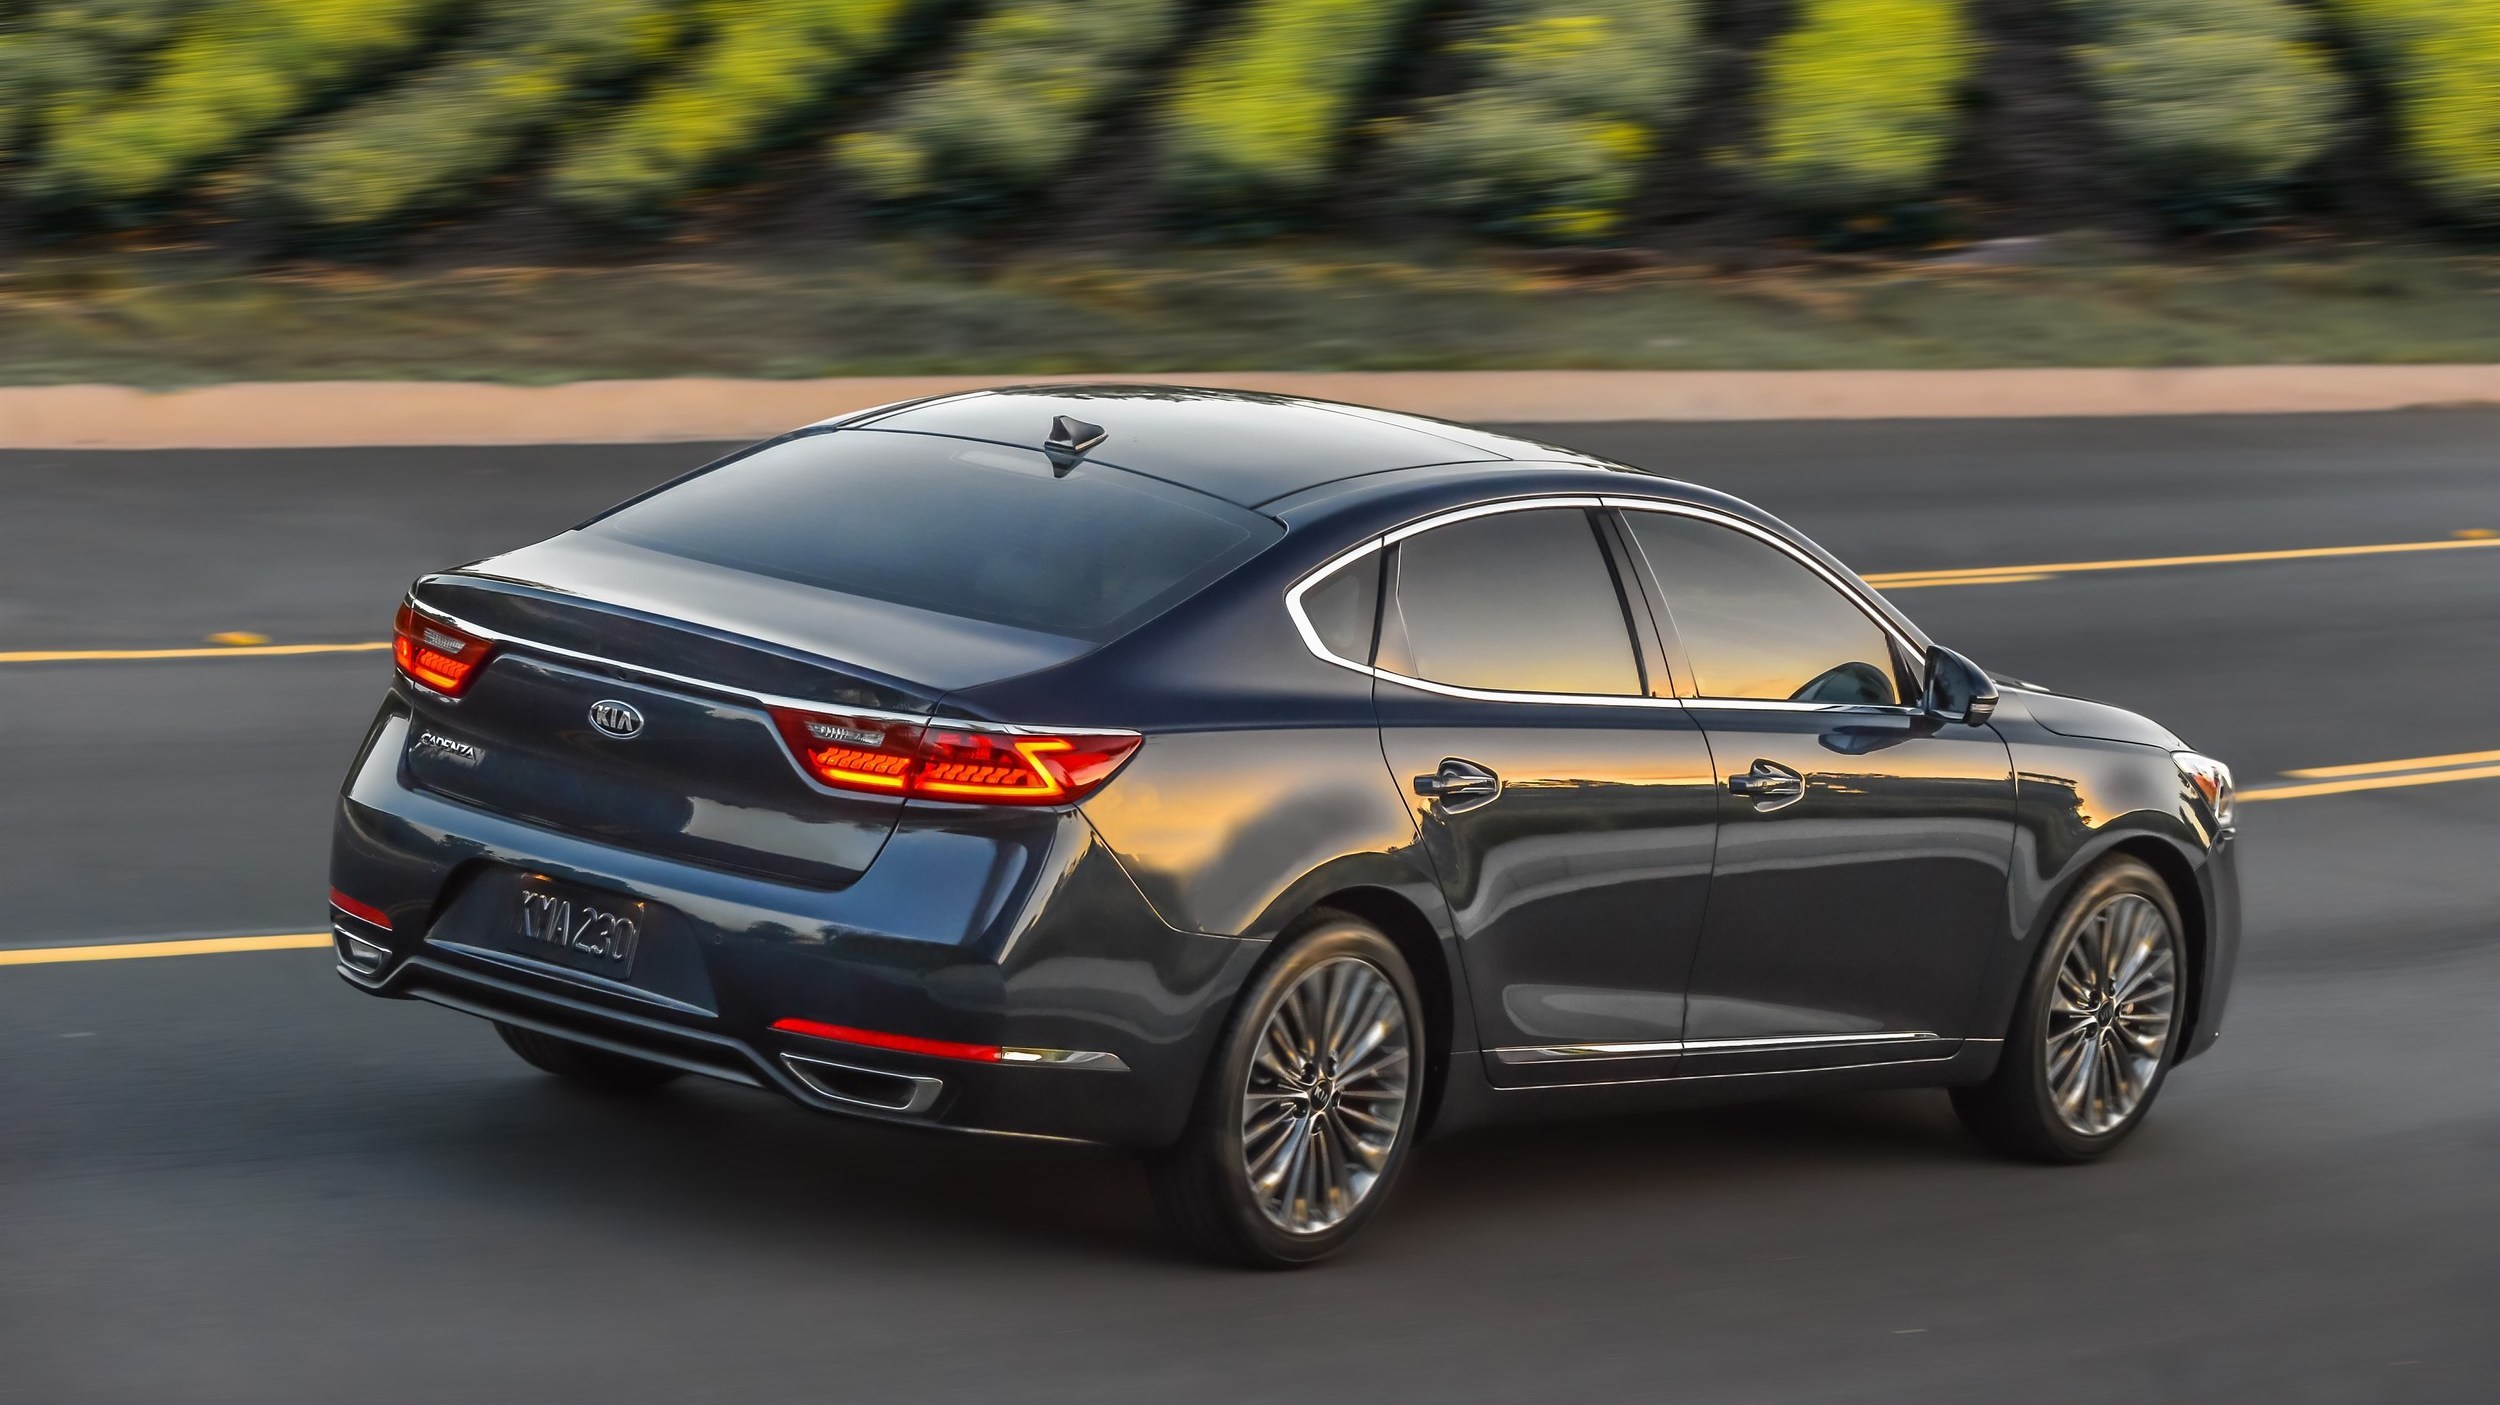 2017-kia-cadenza-stands-out-in-new-york_13.jpg